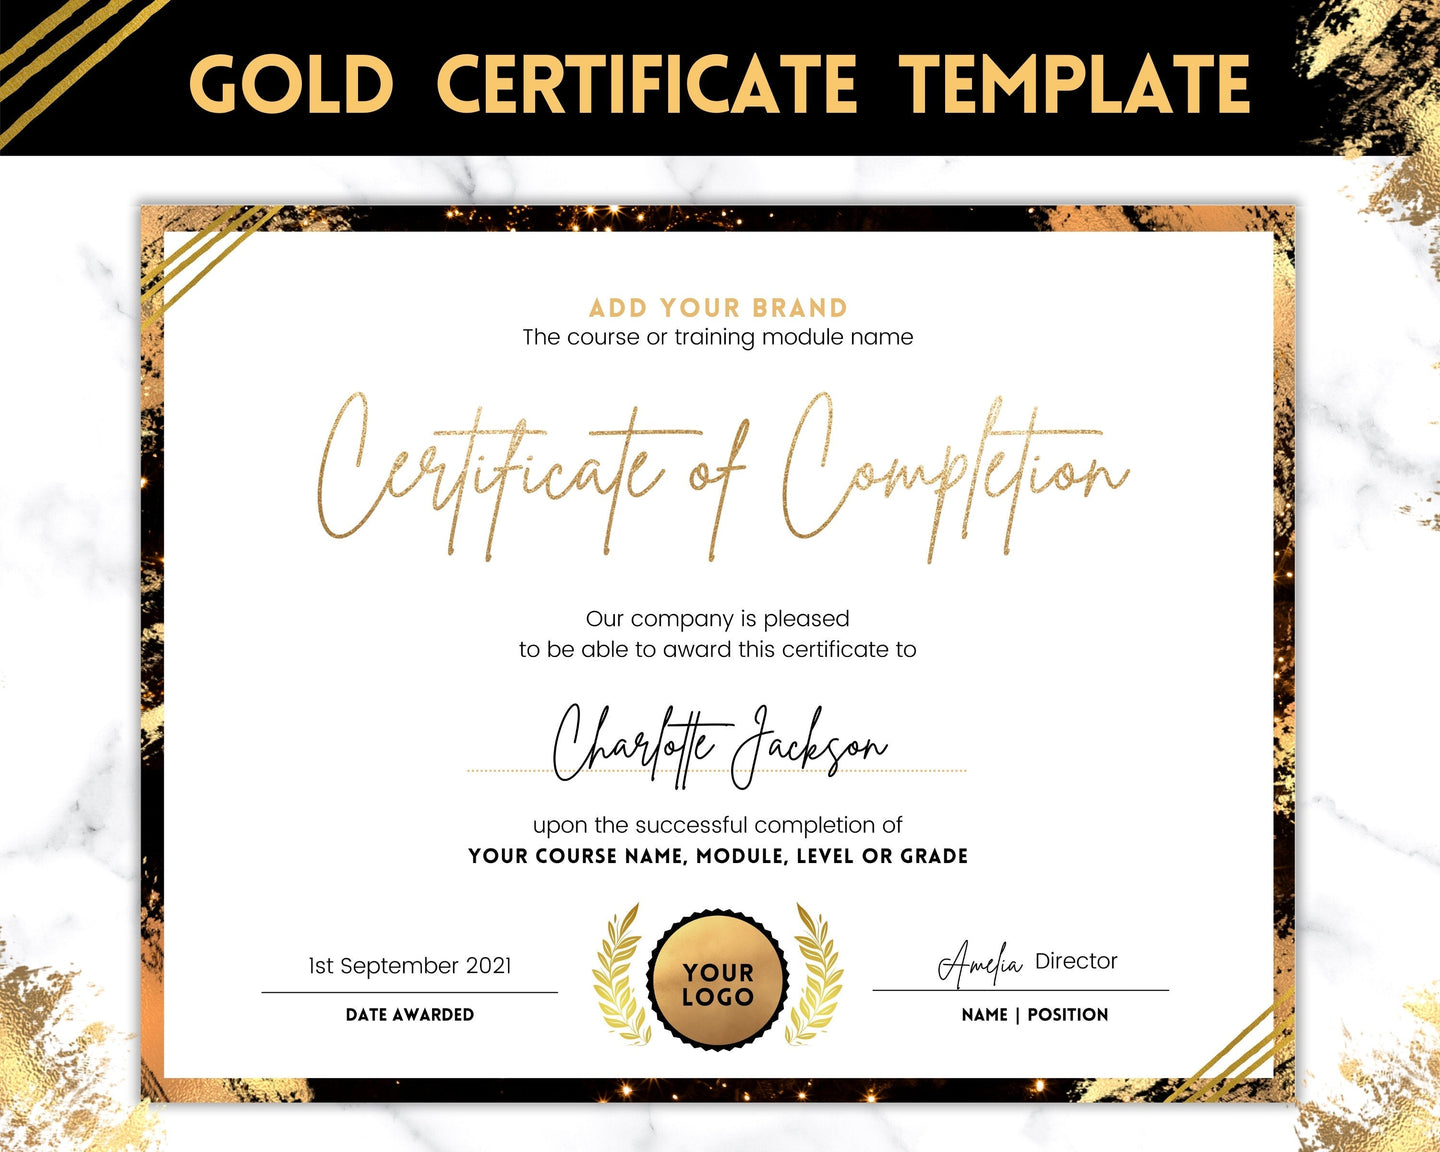 Certificate Template, Editable Certificate of Completion, Achievement, Award, Recognition, Hair, Massage, Lashes Course, Training | Gold